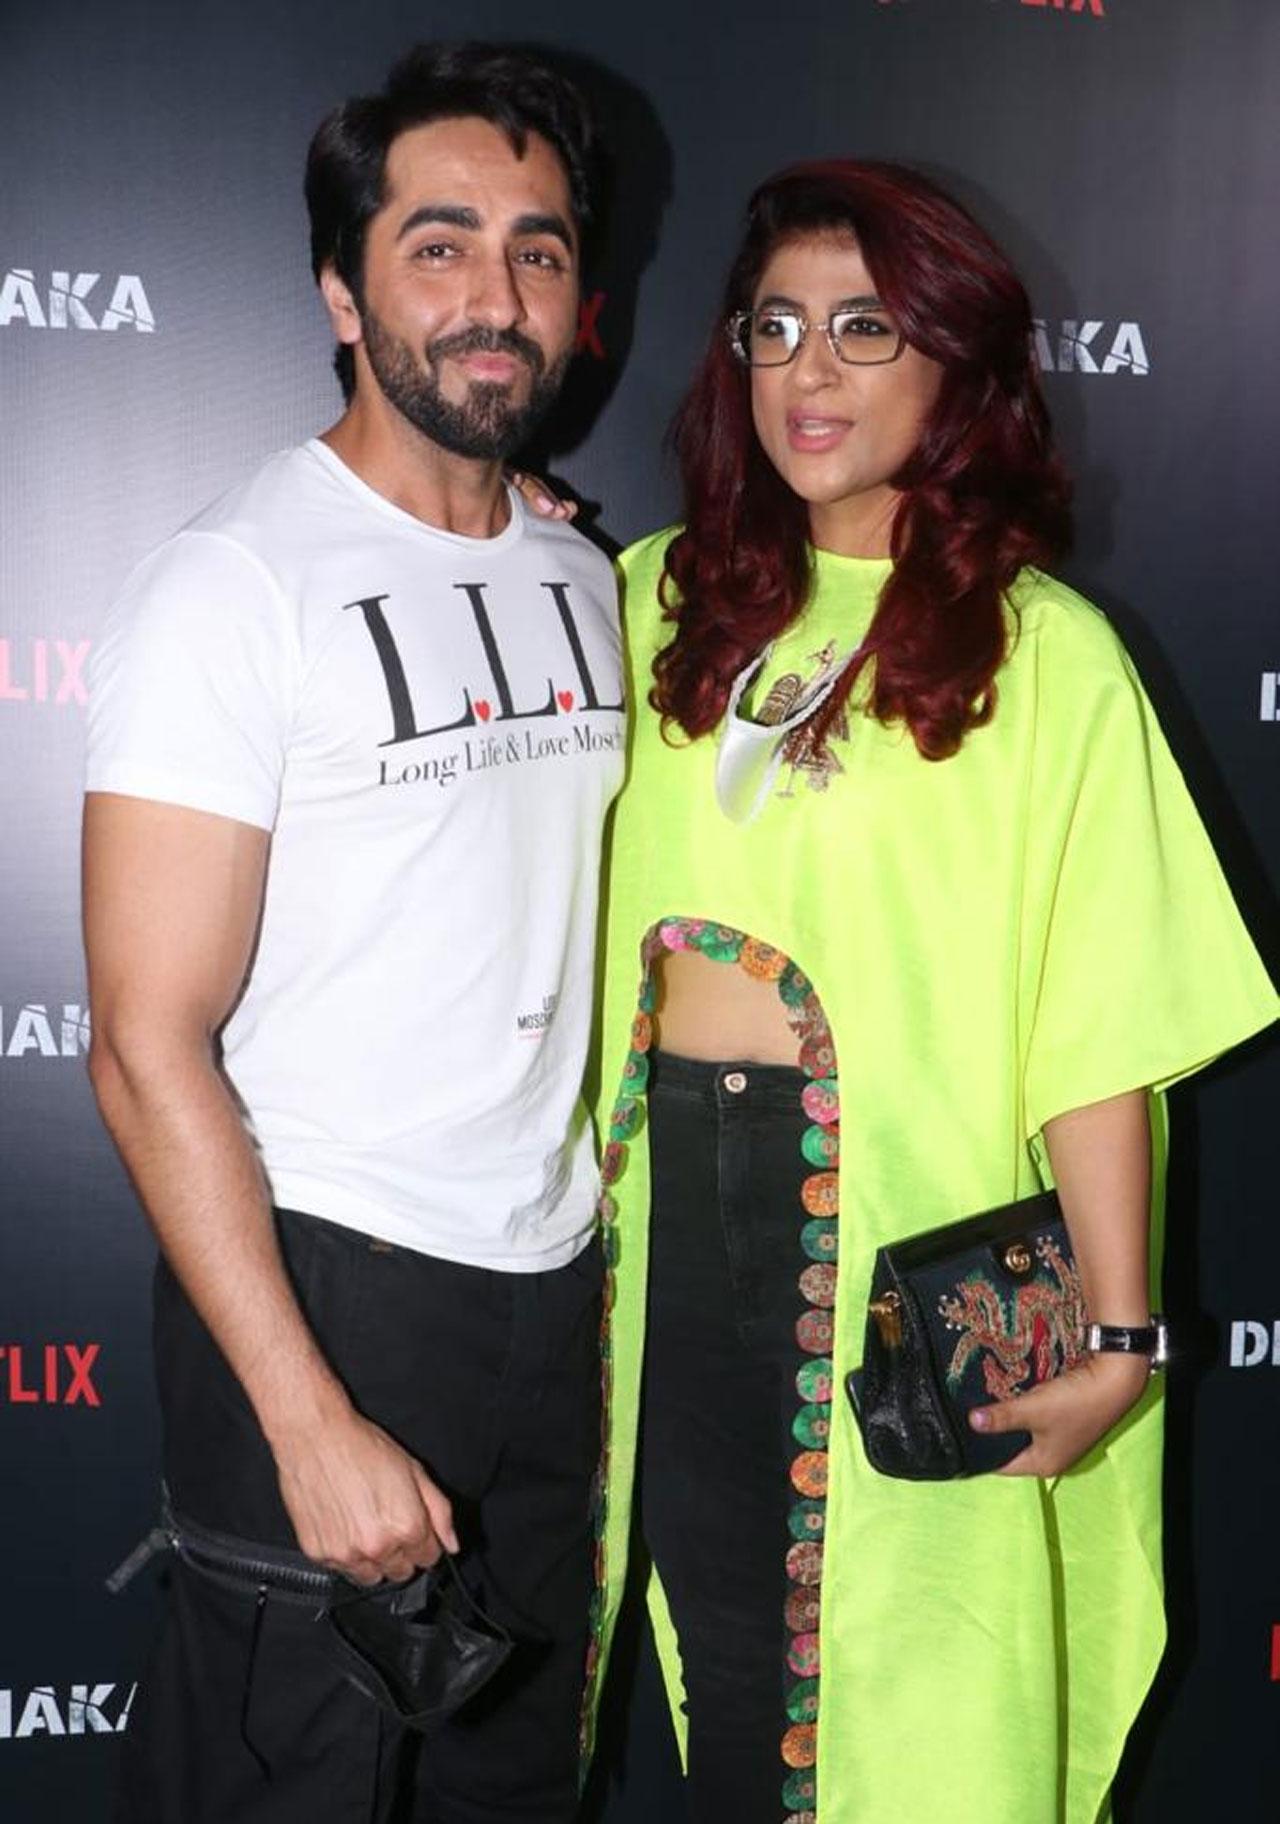 This was indeed a star-studded affair that was attended by The Who’s who of Bollywood. Ayushmann Khurrana was clicked with wife Tahira Kashyap and the husband and wife nailed their respective causal outfits.